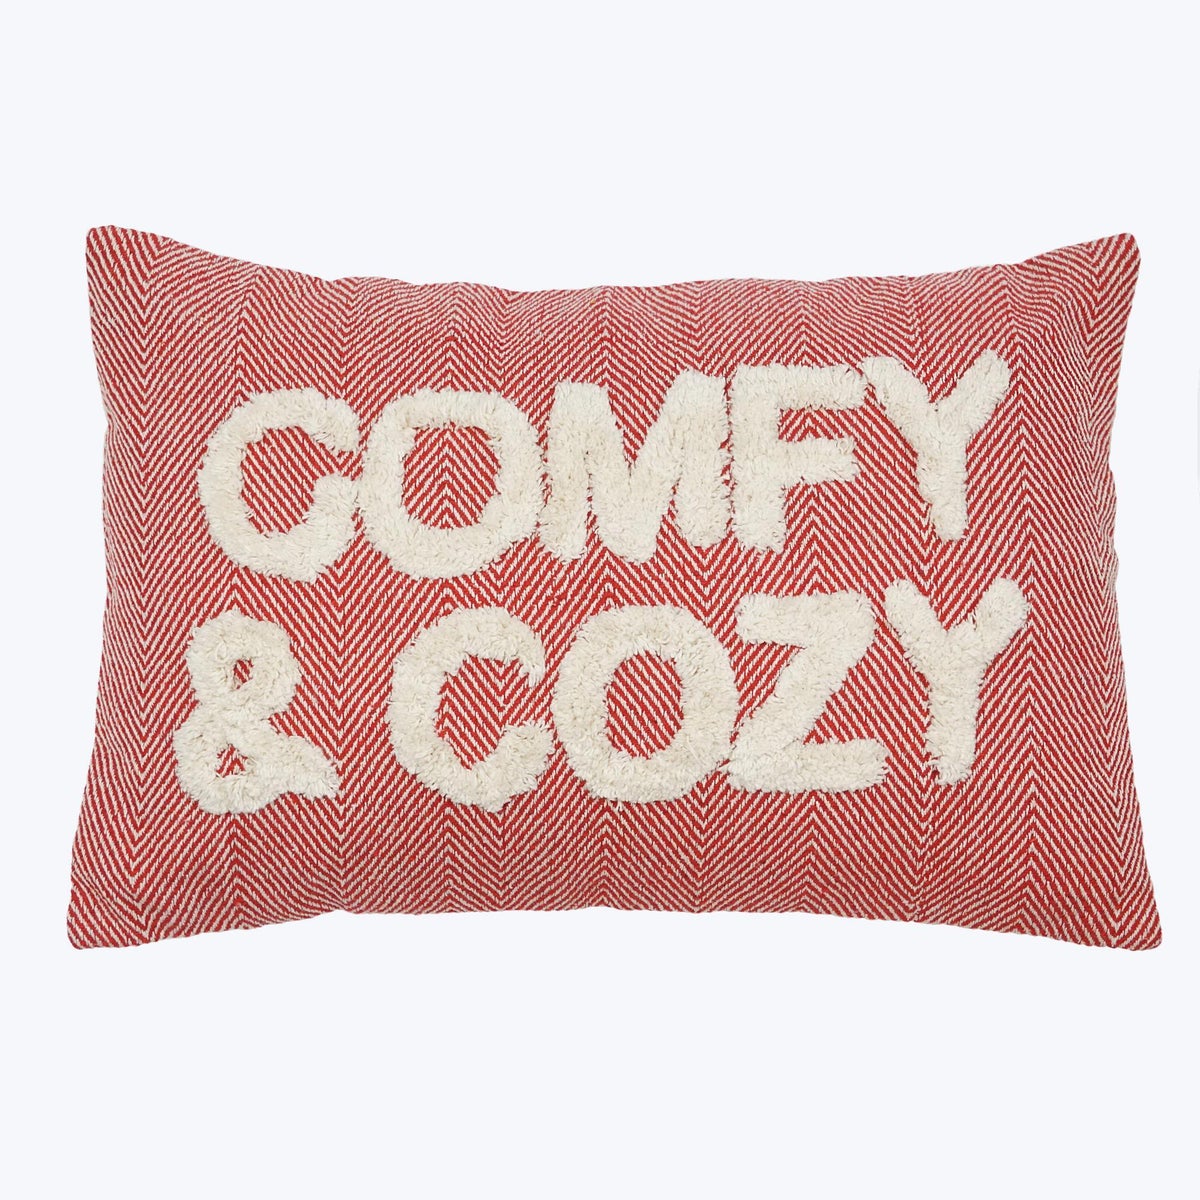 Cotton Hand Woven Pillow with Tufting Pillow